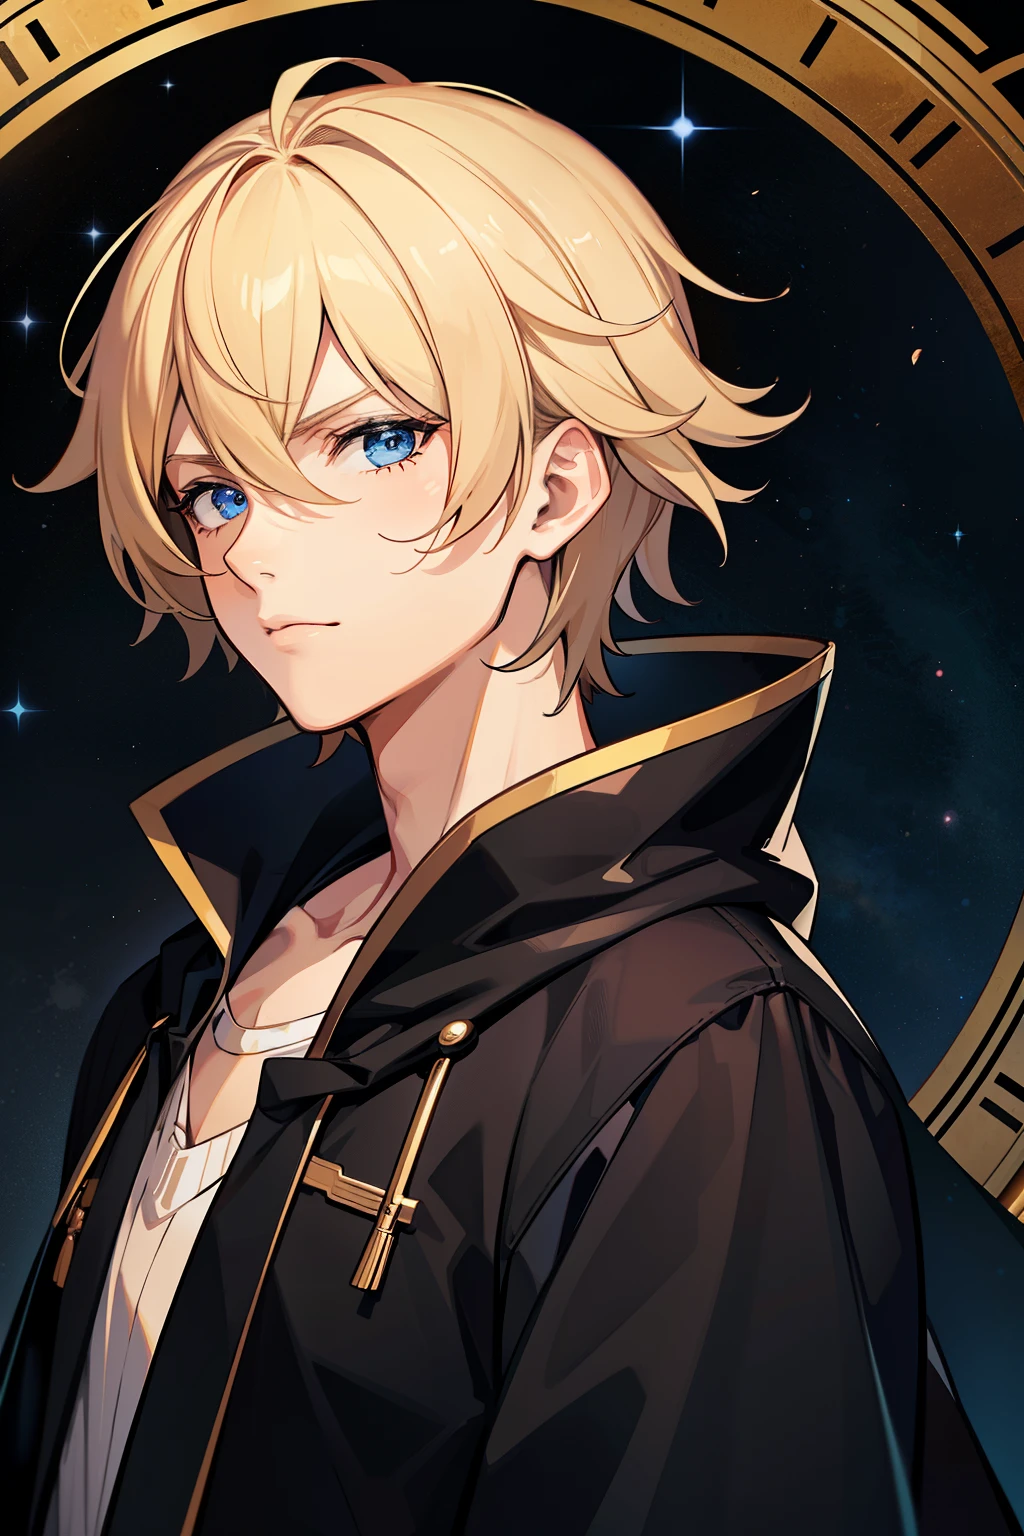 (high-quality, breathtaking),(expressive eyes, perfect face) 1male, male, solo, teenager, short length hair, blonde with brown highlights hair color, unkept hair, dark blue eyes, serious expression, black robe, white shirt, Saturn, Saturn Roman God of Time, God of Time background, space background, portrait
